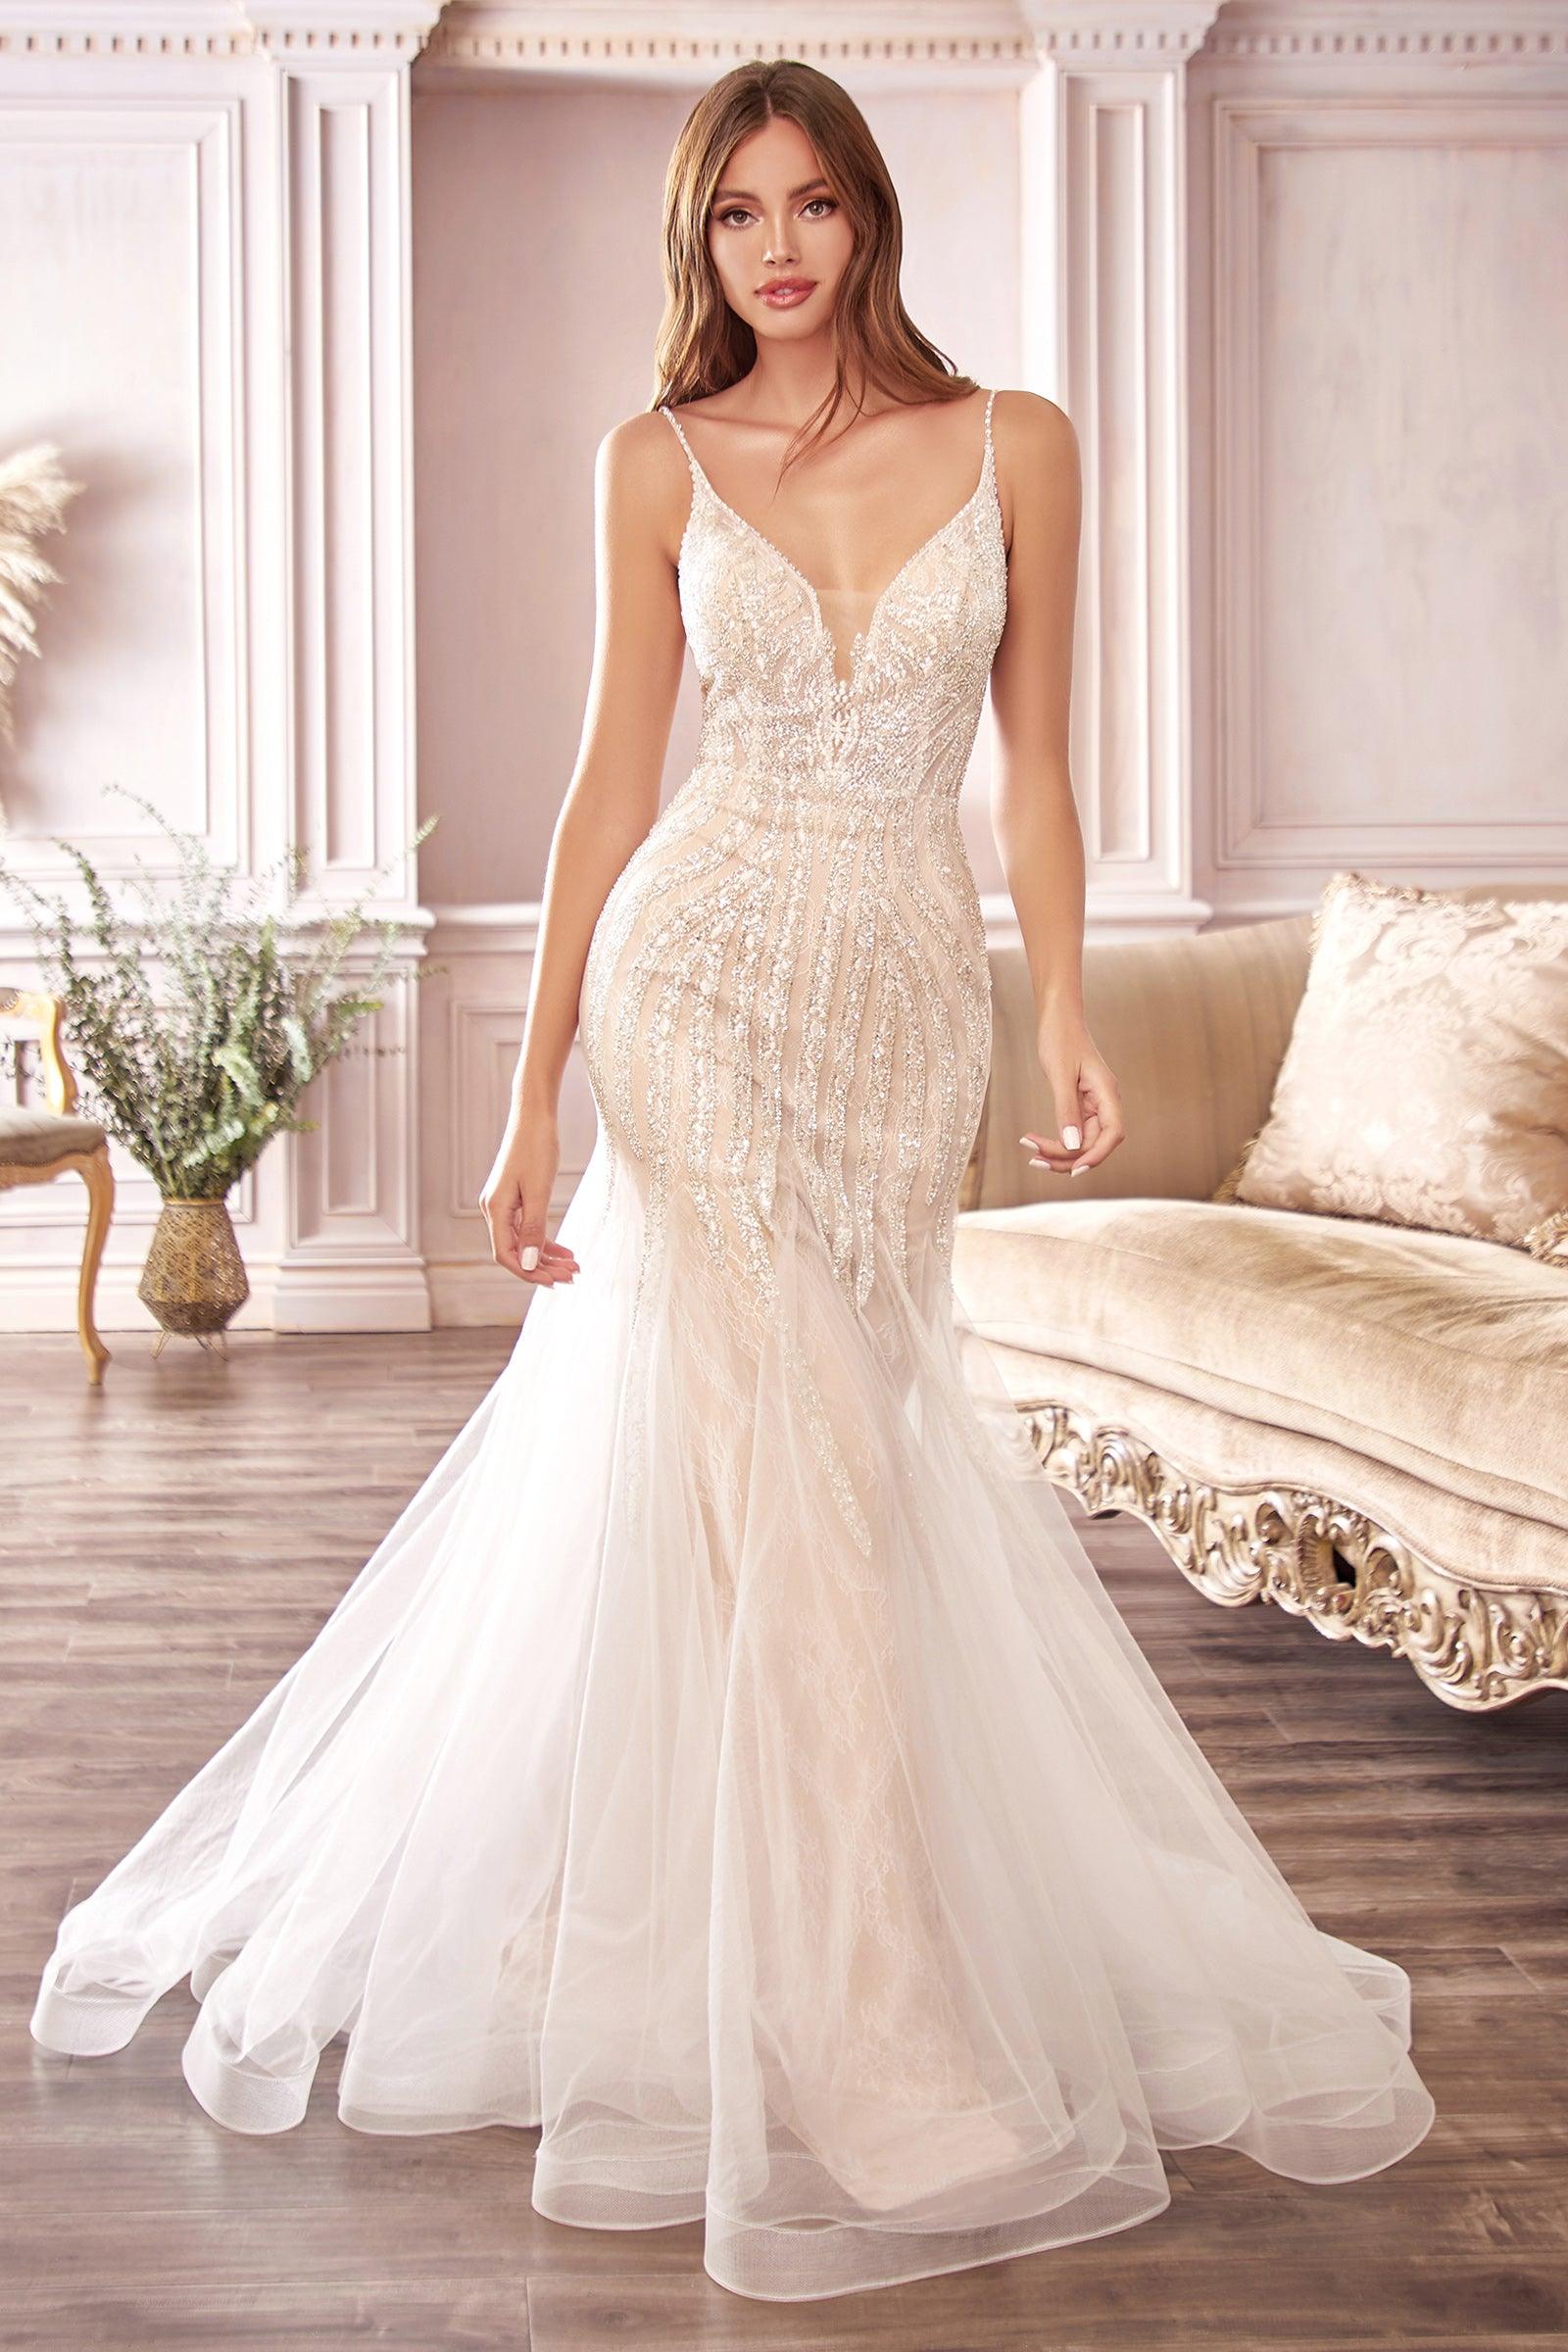 Long Fitted Mermaid Style Wedding Gown - The Dress Outlet